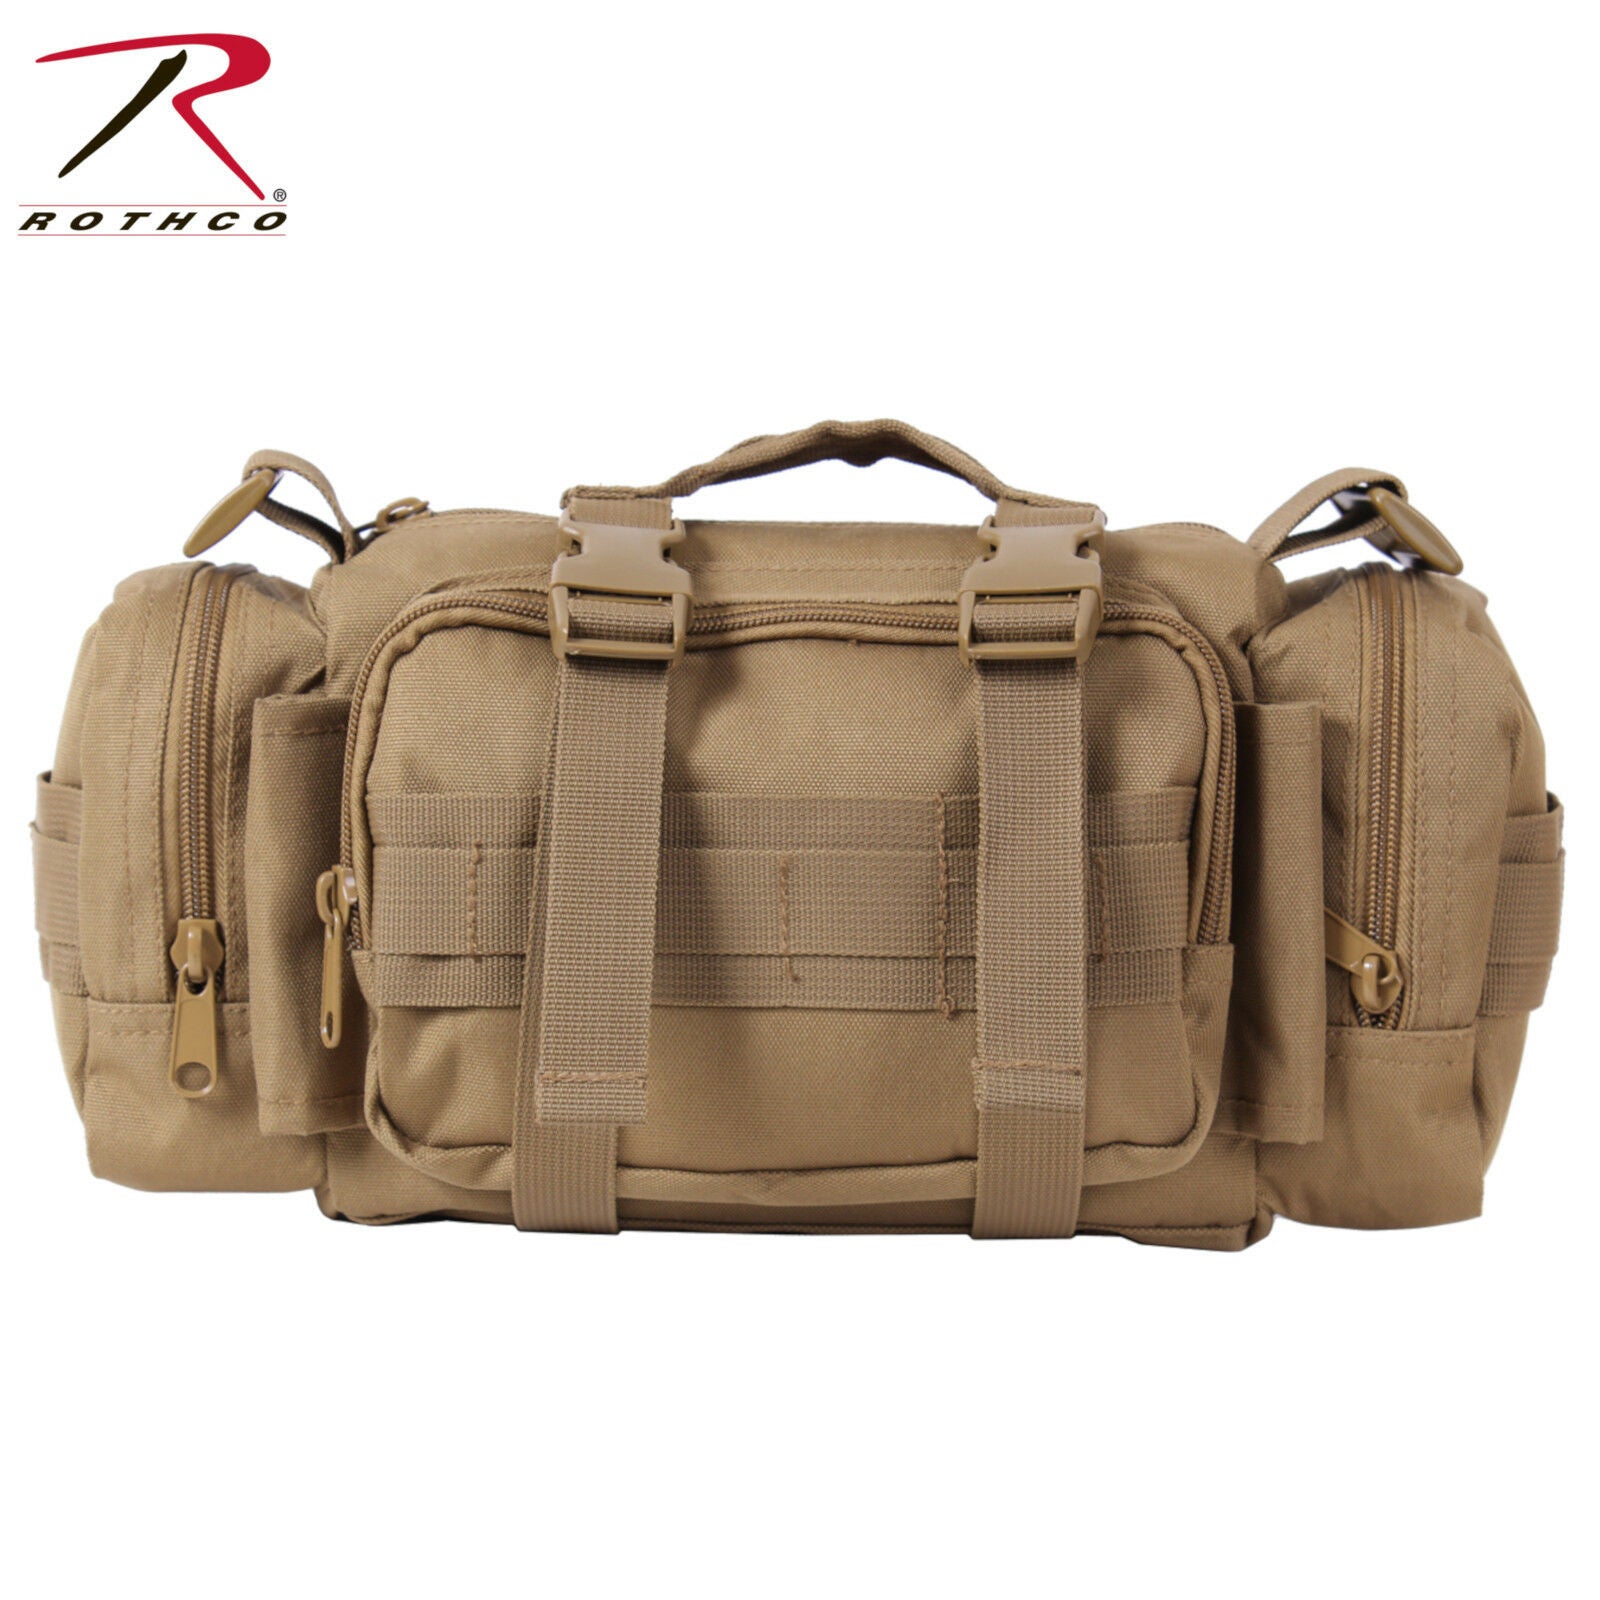 Rothco Fast Access Tactical Trauma Kit-Bag - Includes Over 80